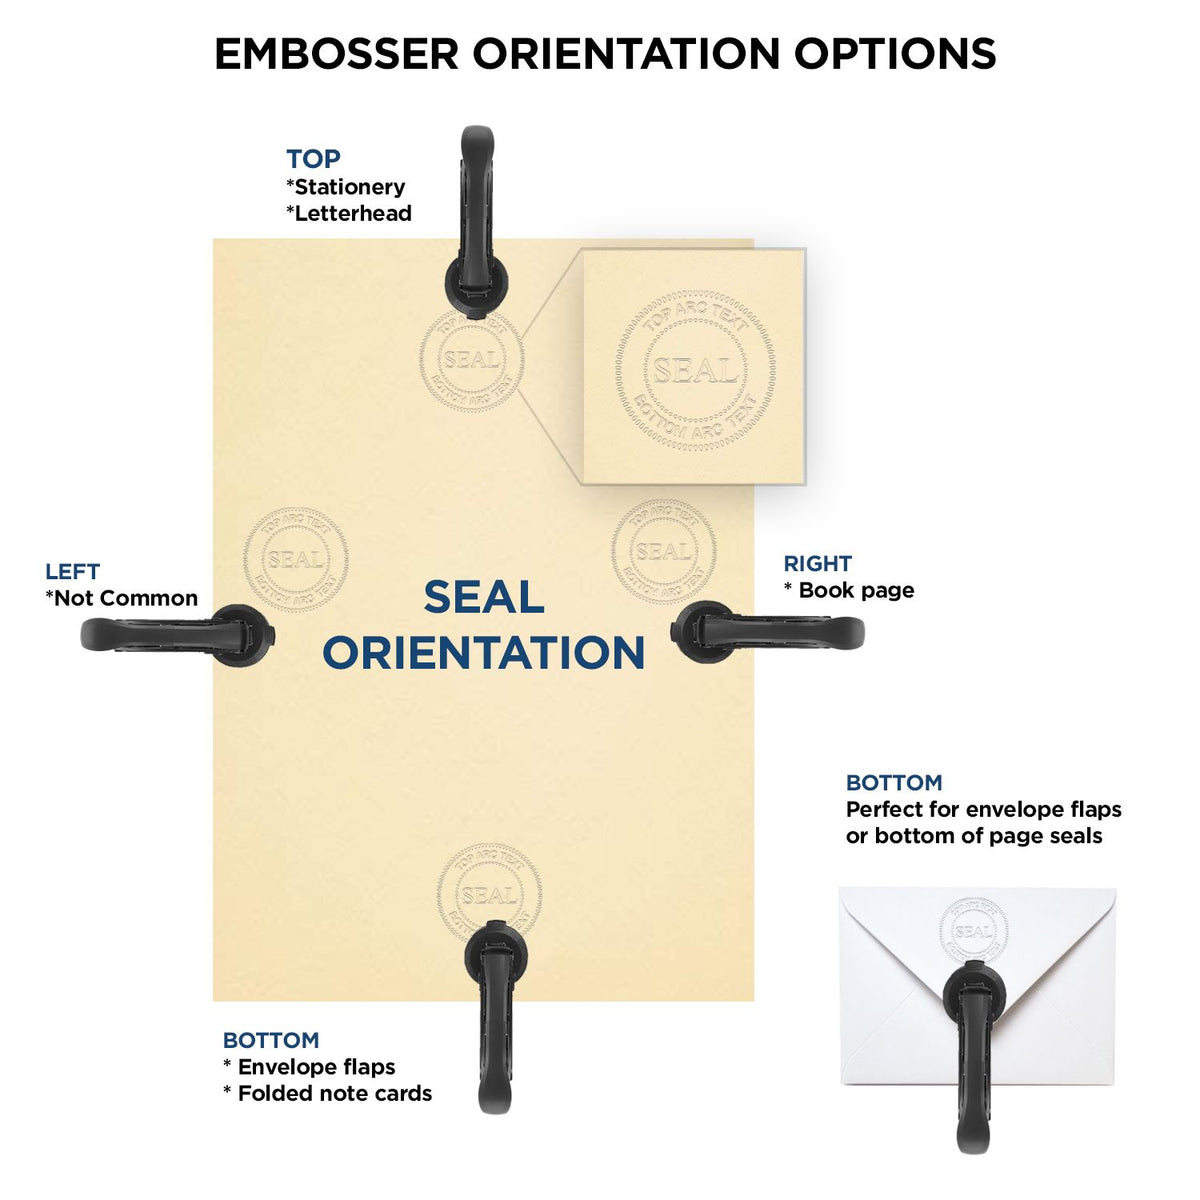 An infographic for the Handheld Delaware Professional Engineer Embosser showing embosser orientation, this is showing examples of a top, bottom, right and left insert.